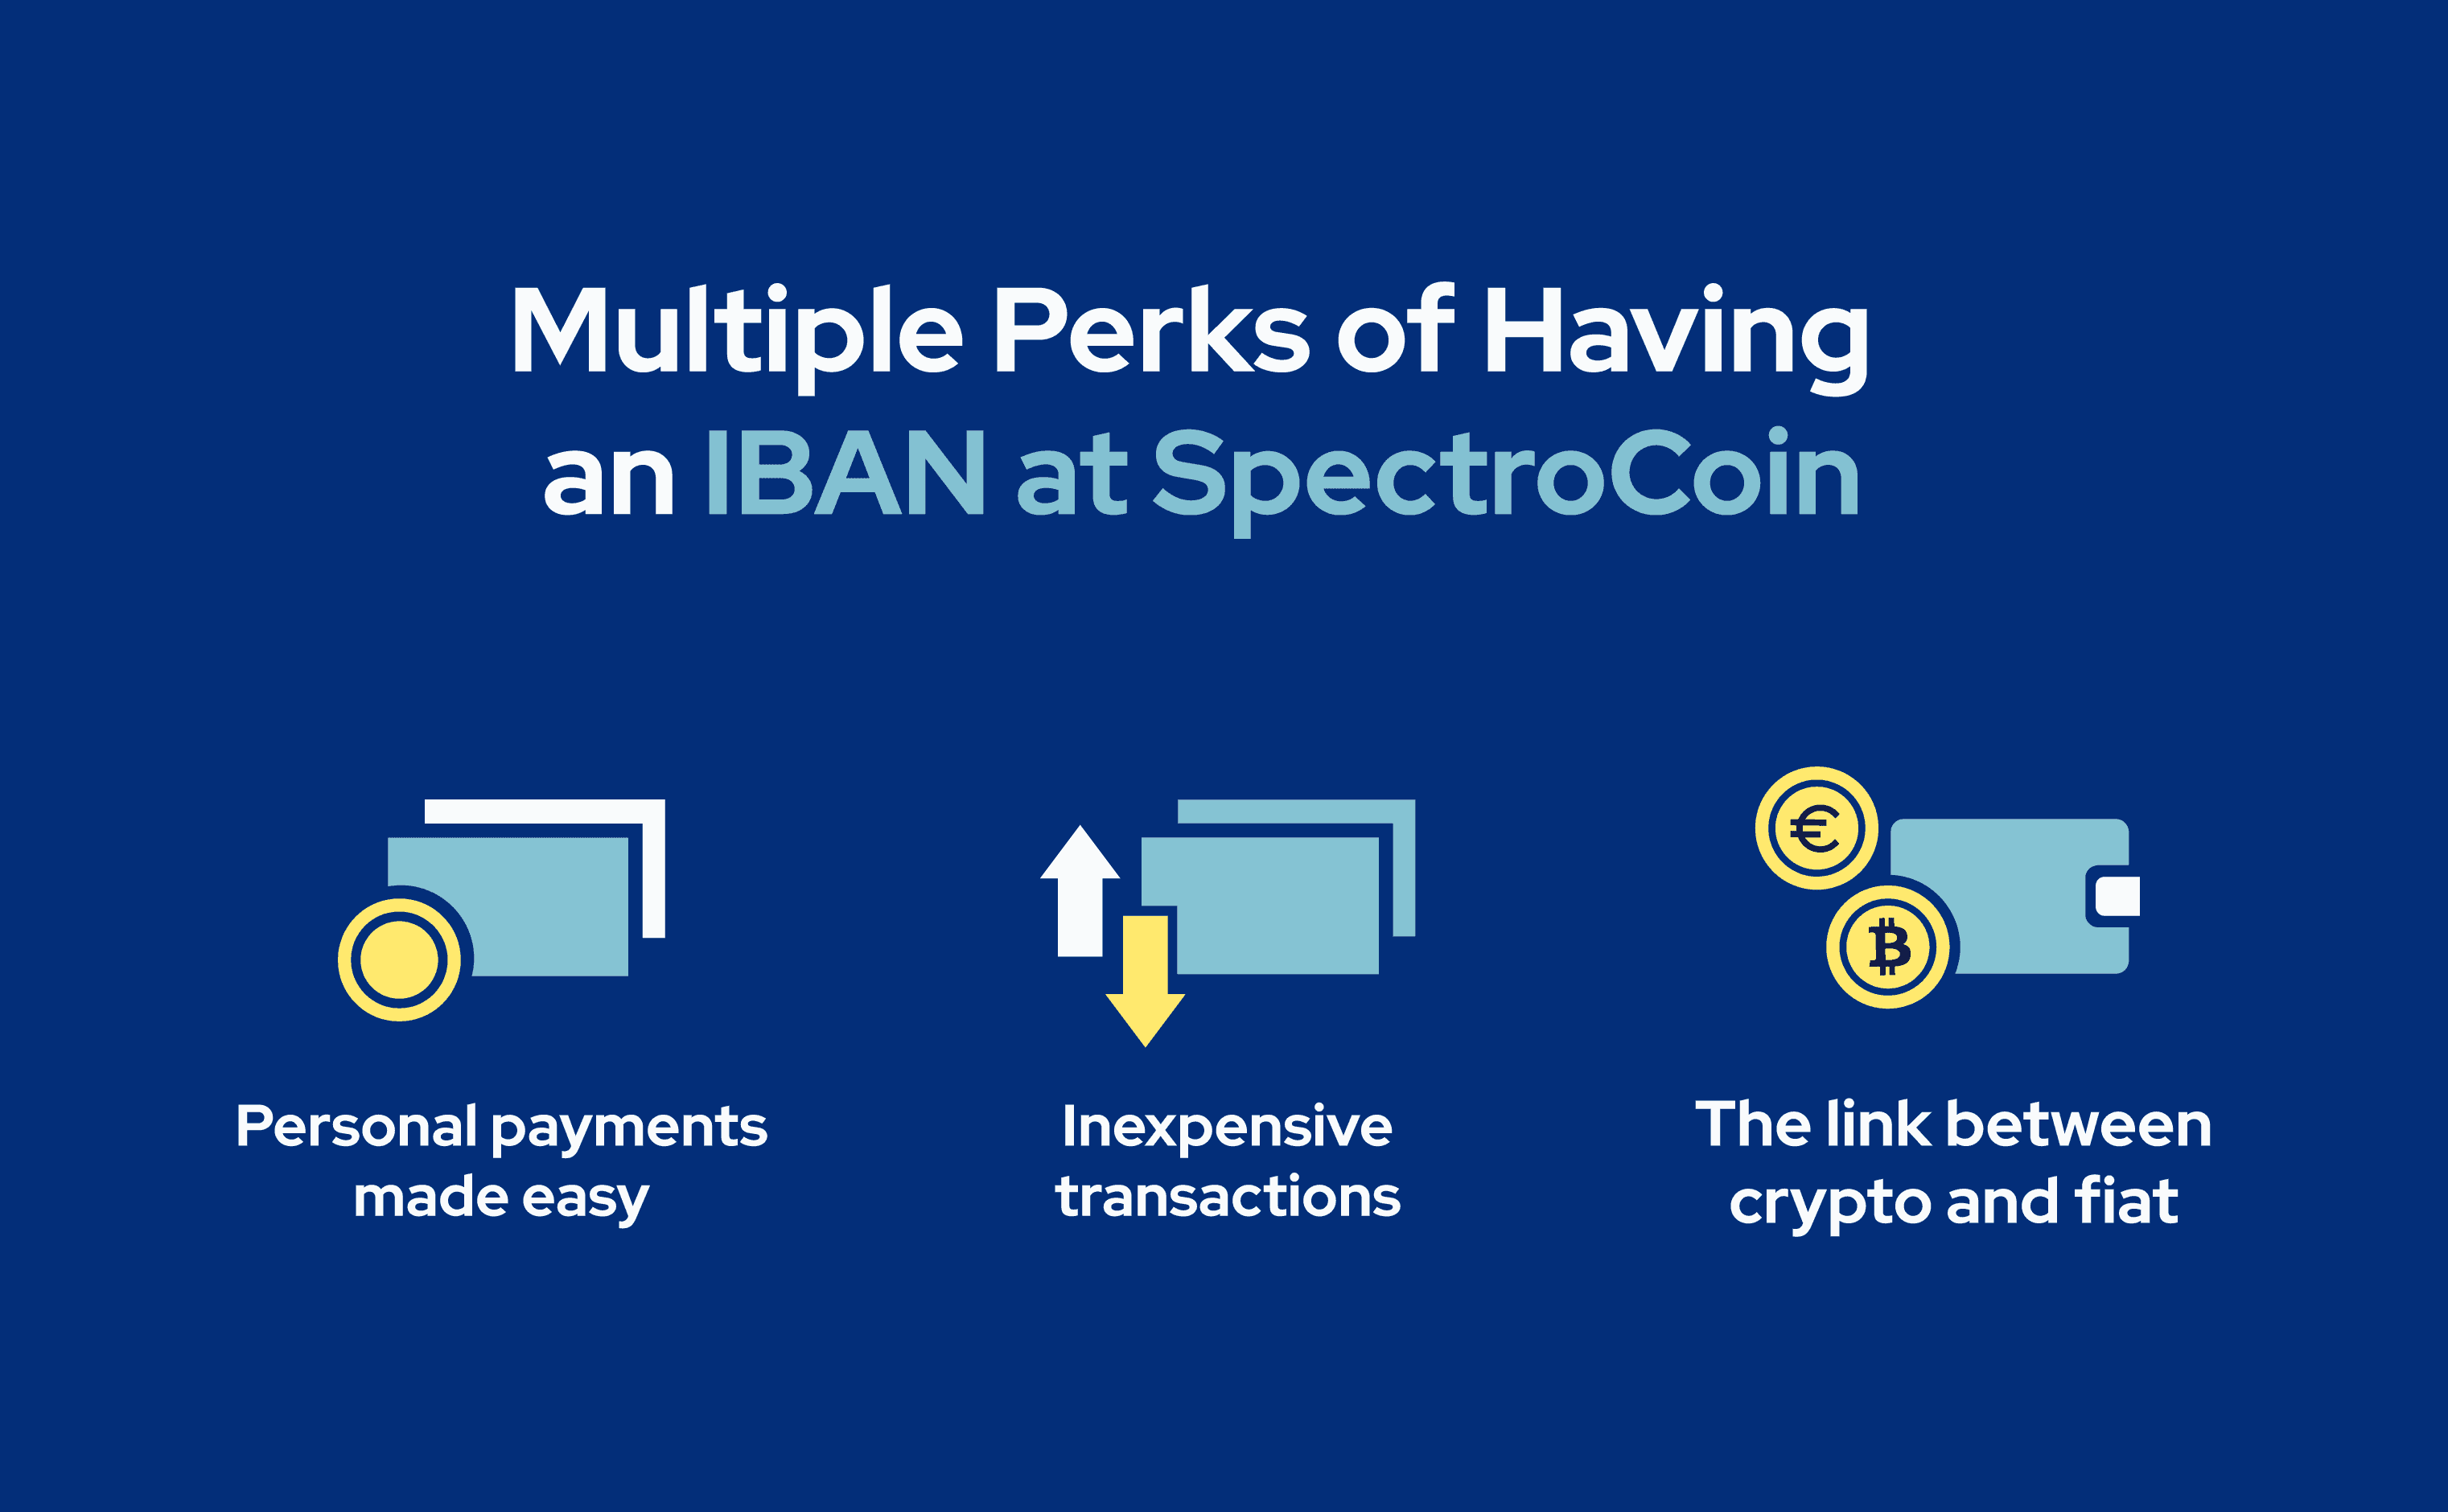 In this picture, the main benefits of having an IBAN at SpectroCoin are explained.